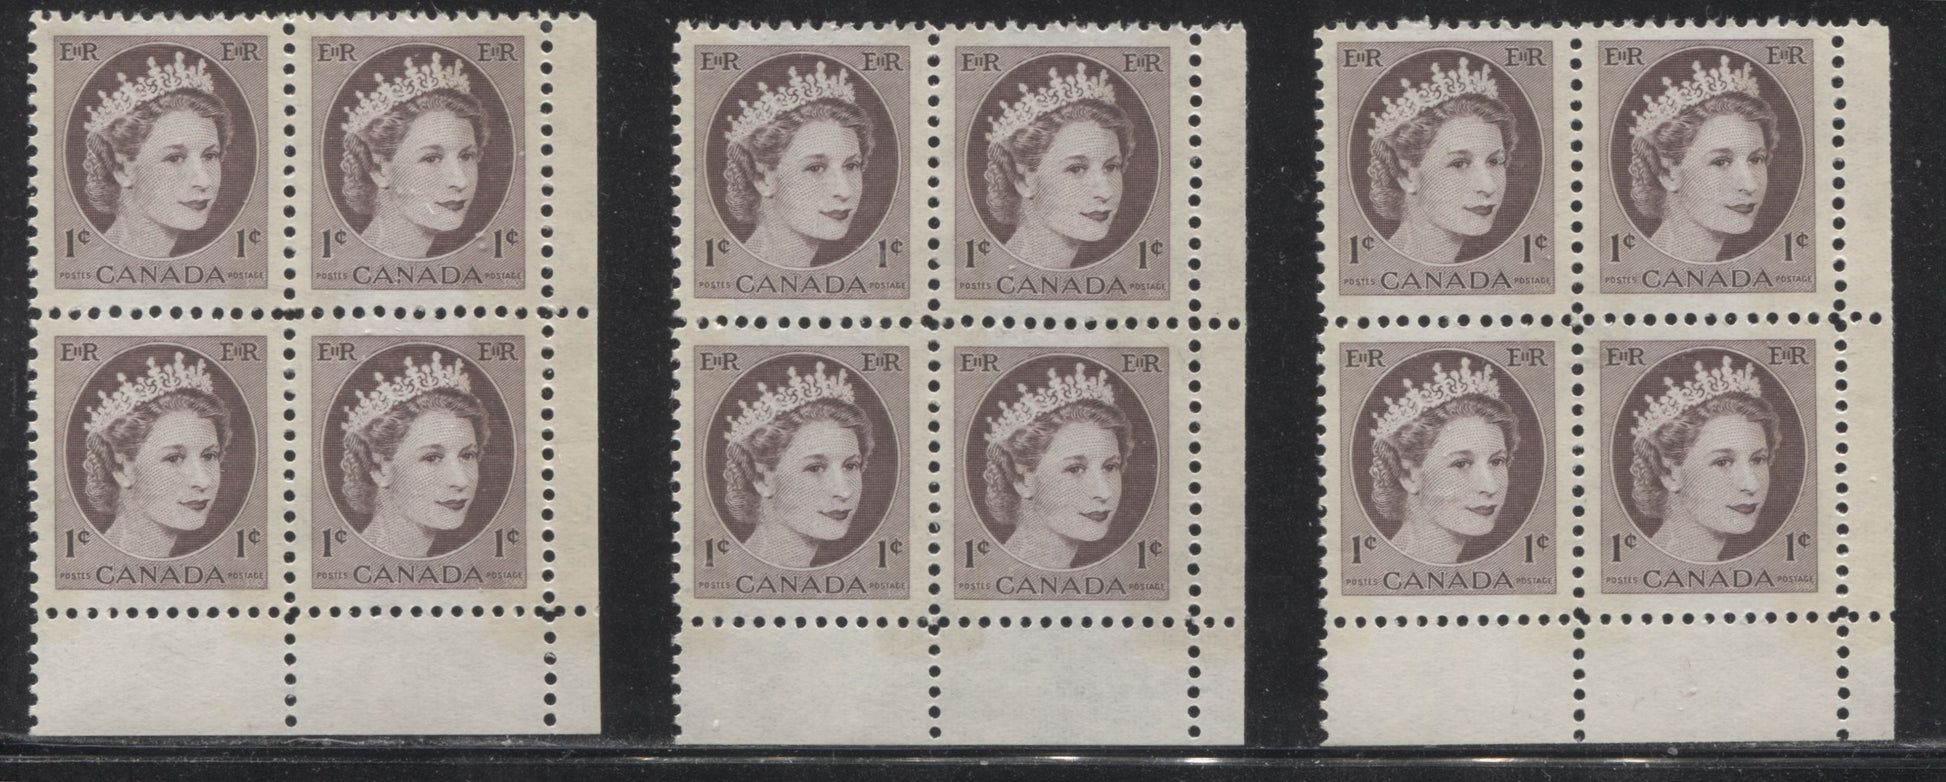 Canada #337p(var) 1c Chocolate Queen Elizabeth II, 1954-1962 Wilding Issue, Lower Right Blank Winnipeg Tagged Blocks of 4, Three Different, Various Perfs., DF Gr Vertically Ribbed Paper, Streaky Semi Gloss Gum, Bluish White Tagging, Uneven Bars, VFNH Brixton Chrome 